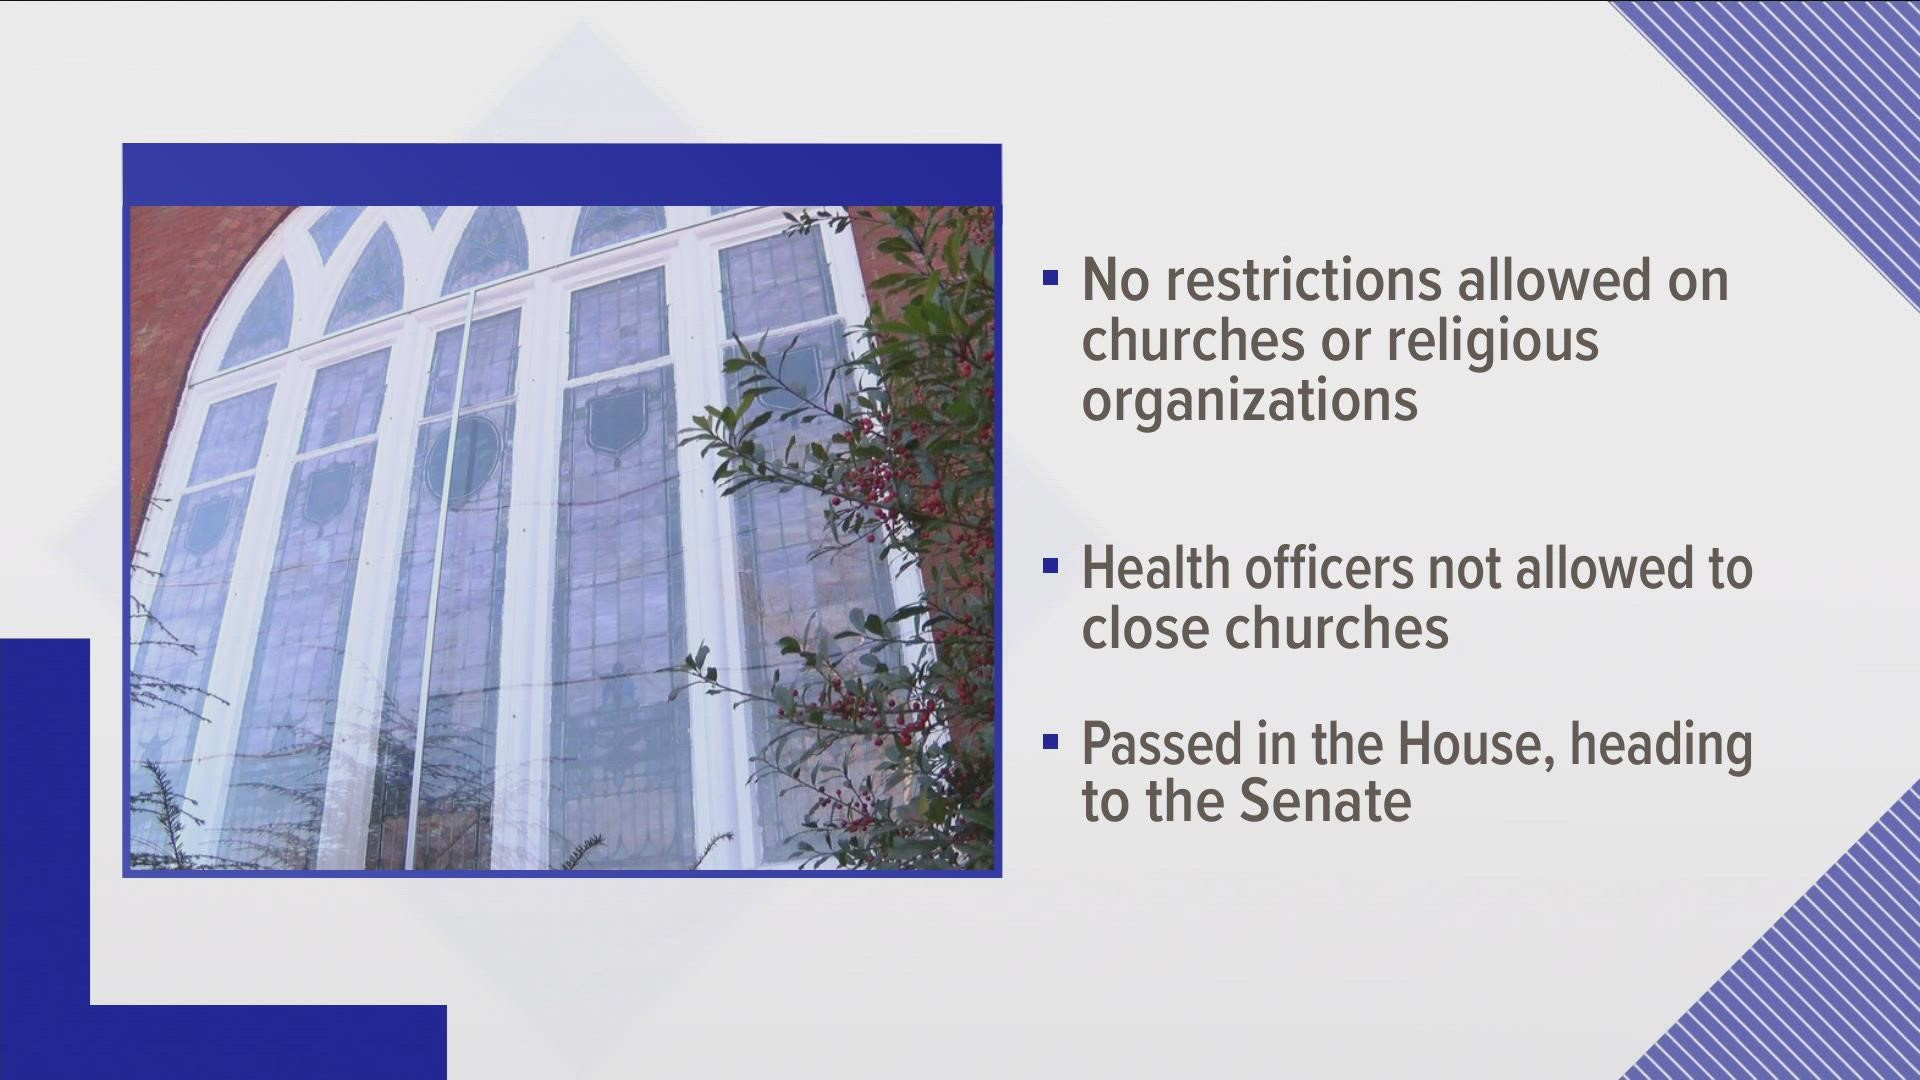 The bill, HB 1137, would prohibit public officials from restricting religious gatherings and other religious activities during a state of emergency.